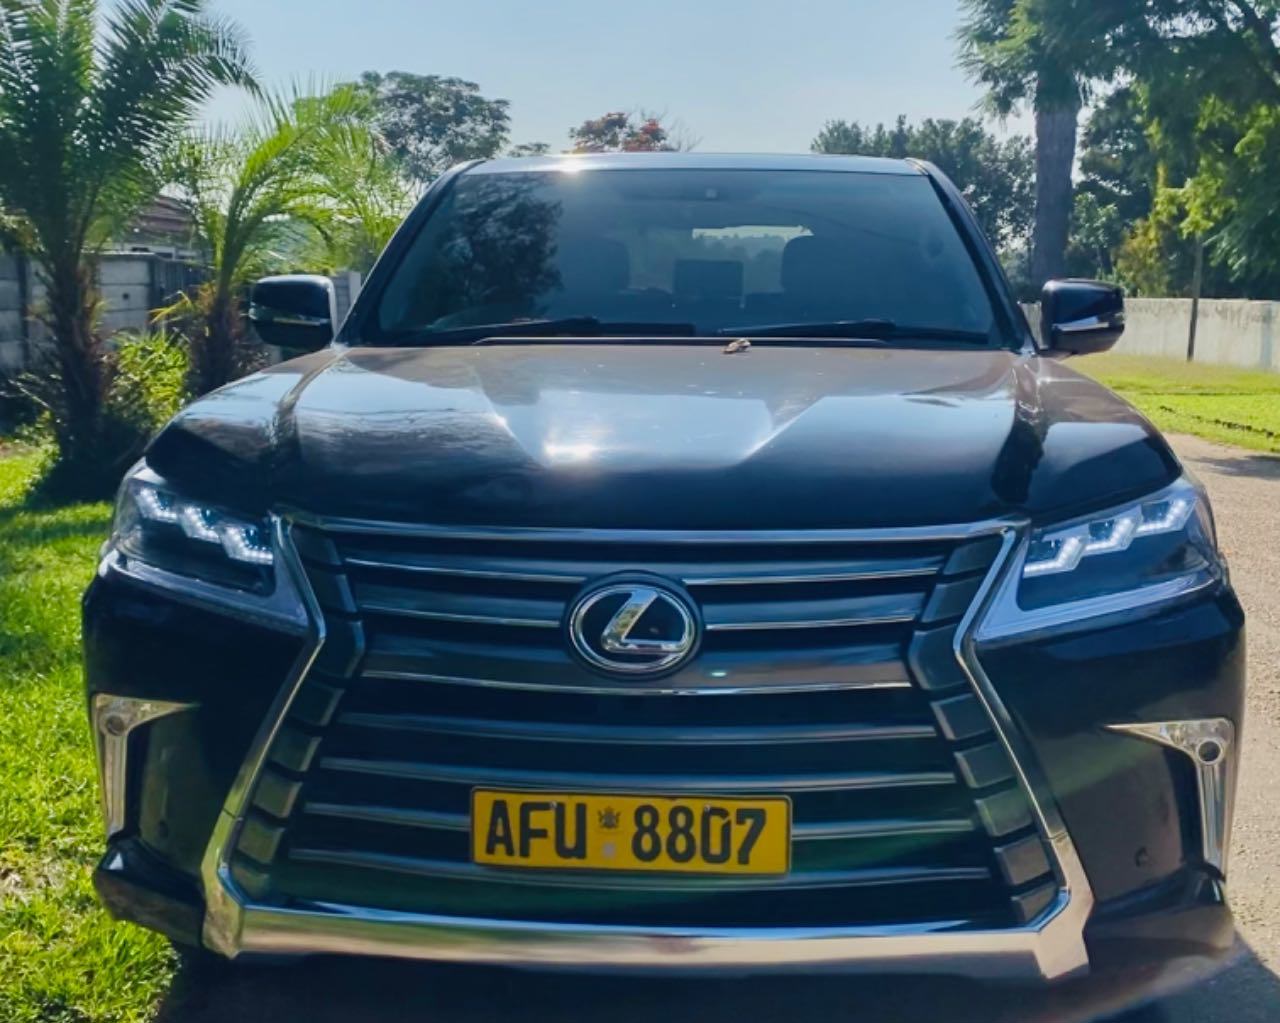 A picture of Lexus LX 570 2013 model